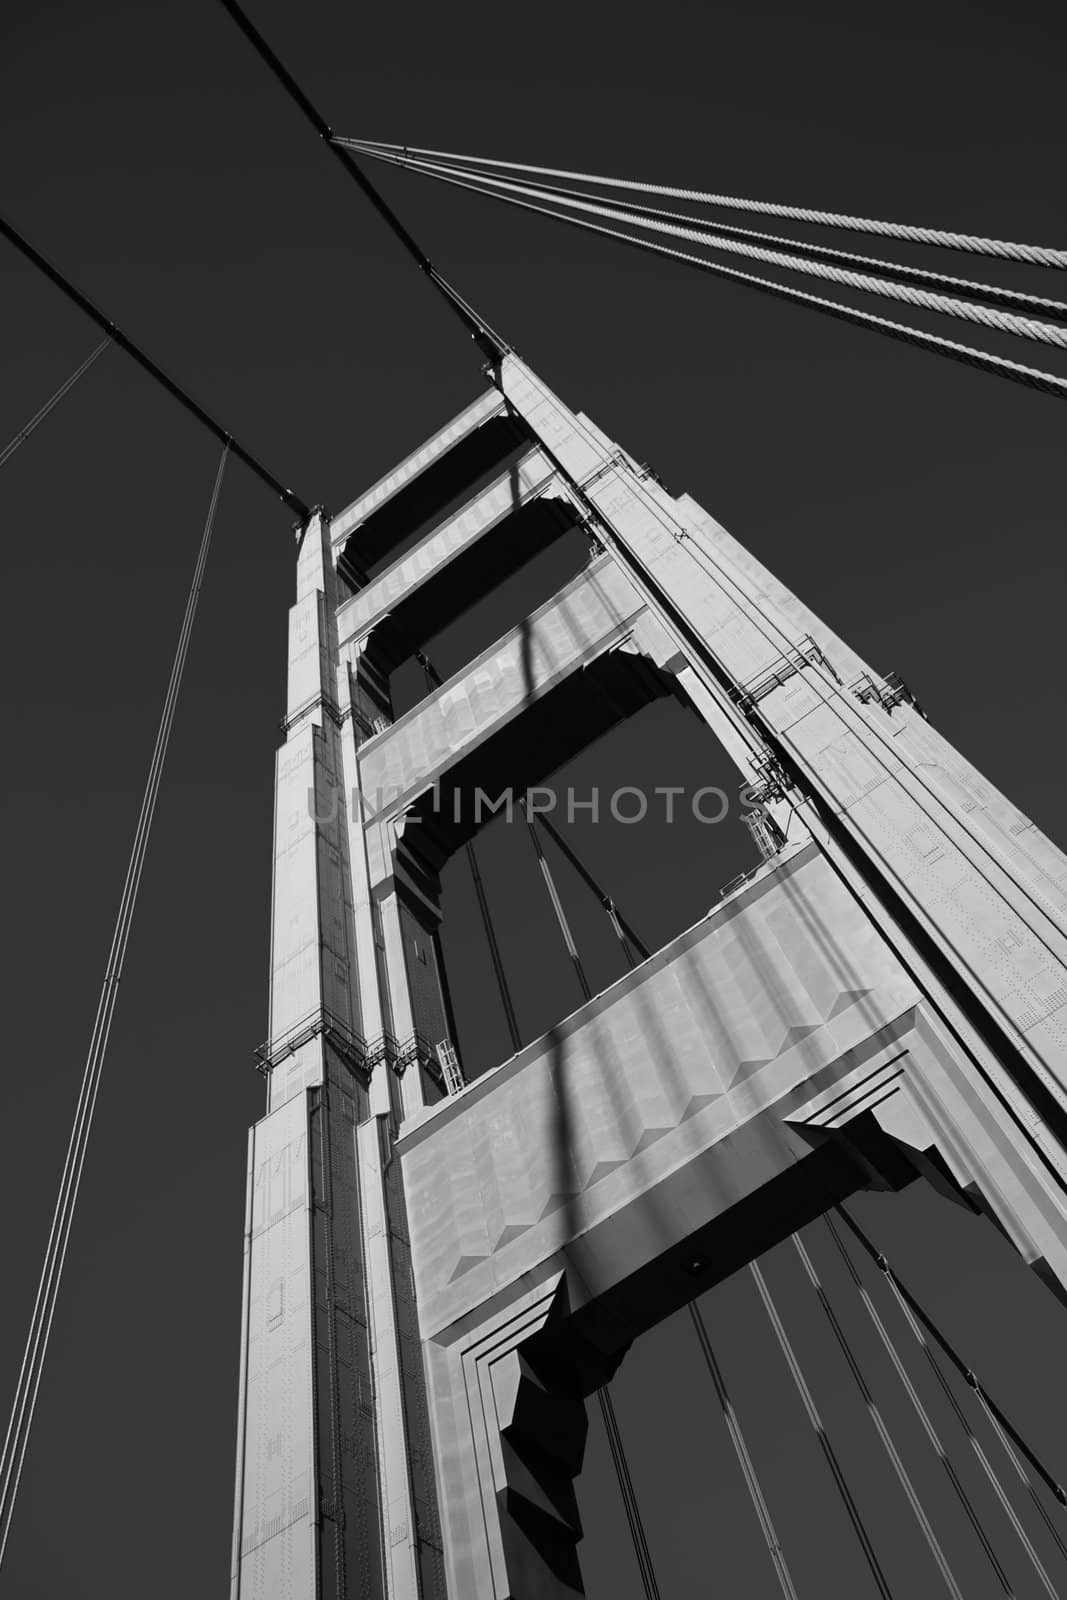 Black and White close up of one of the towers of the Golden Gate bridge